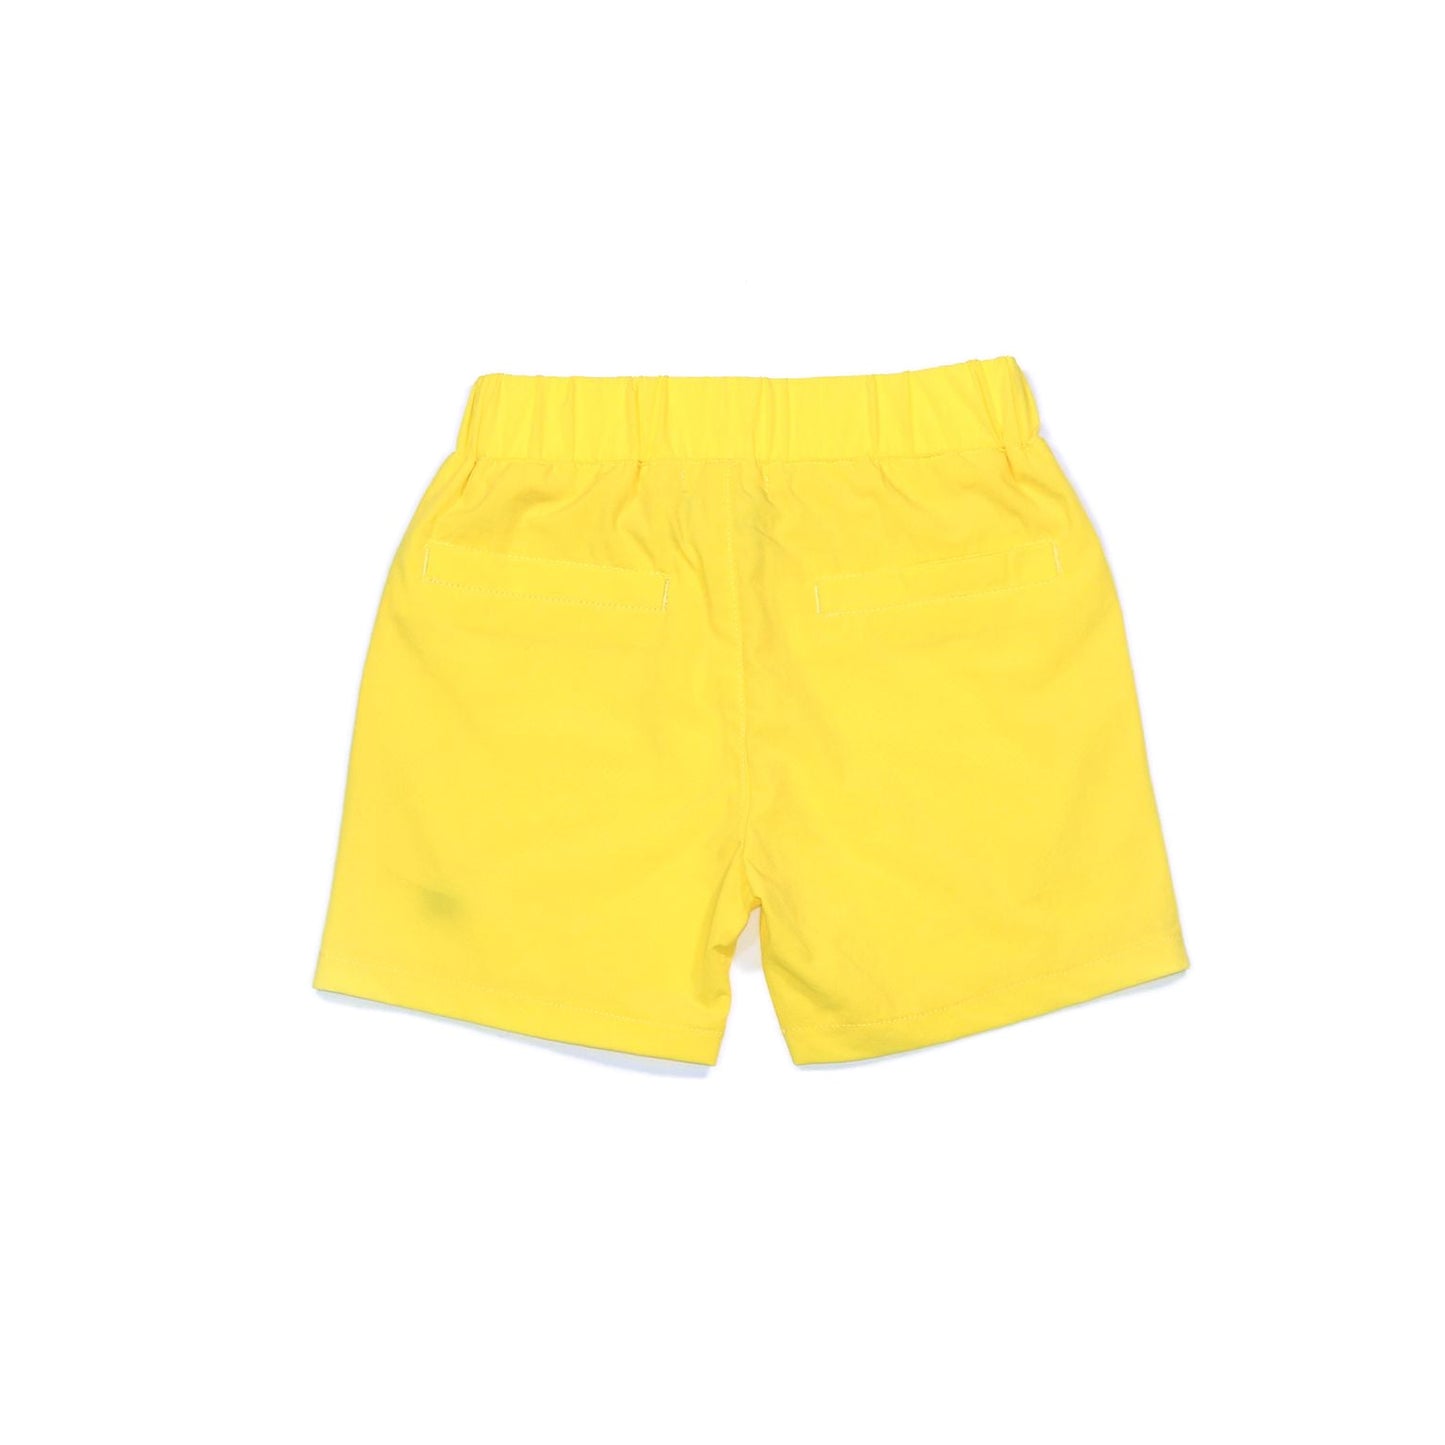 Yellow Shorts by BlueQuail